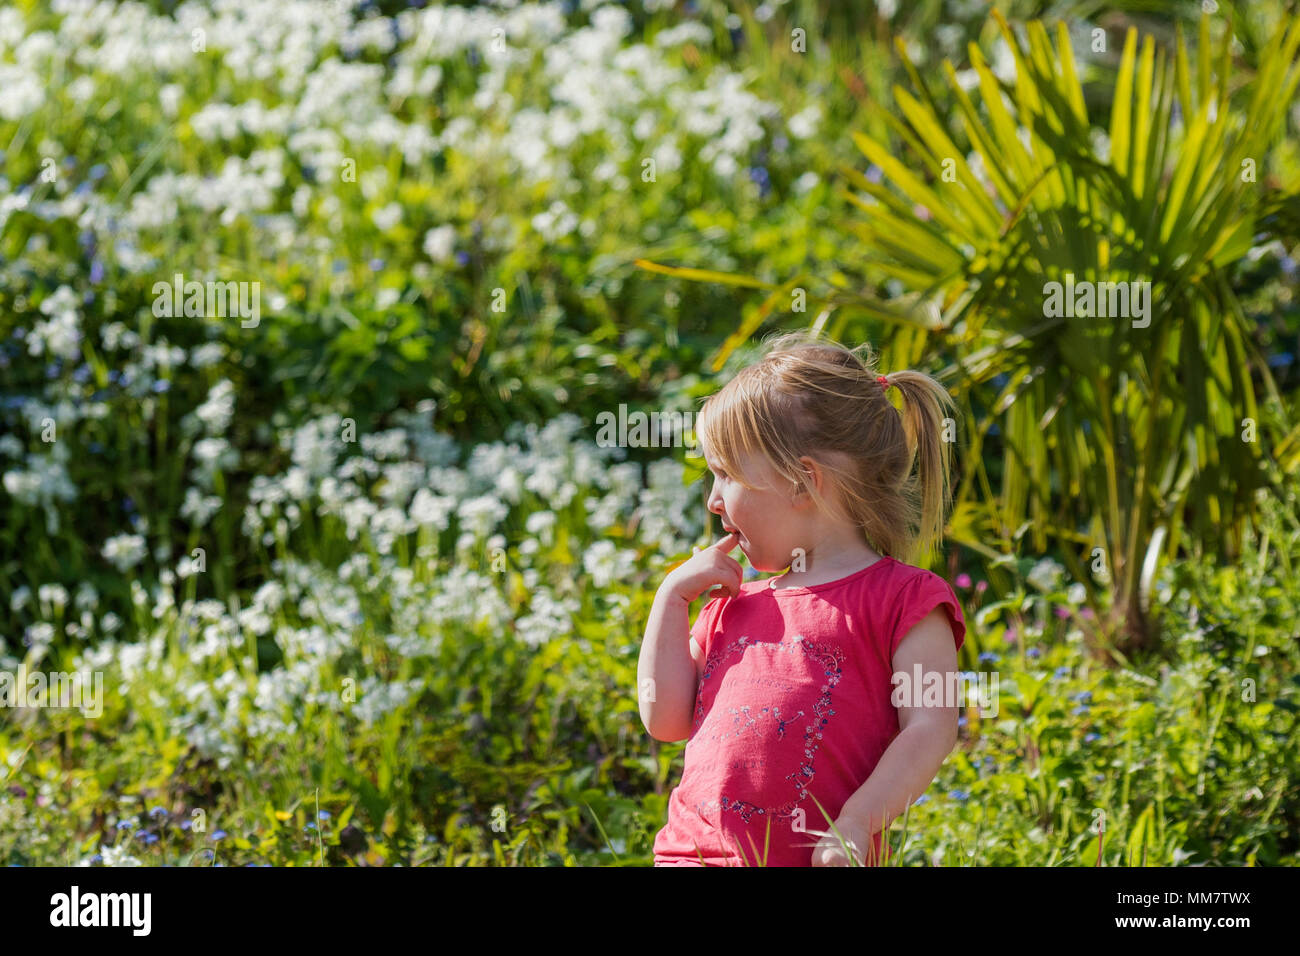 A 3 year old girl standing in a garden full of wild flowers. Stock Photo